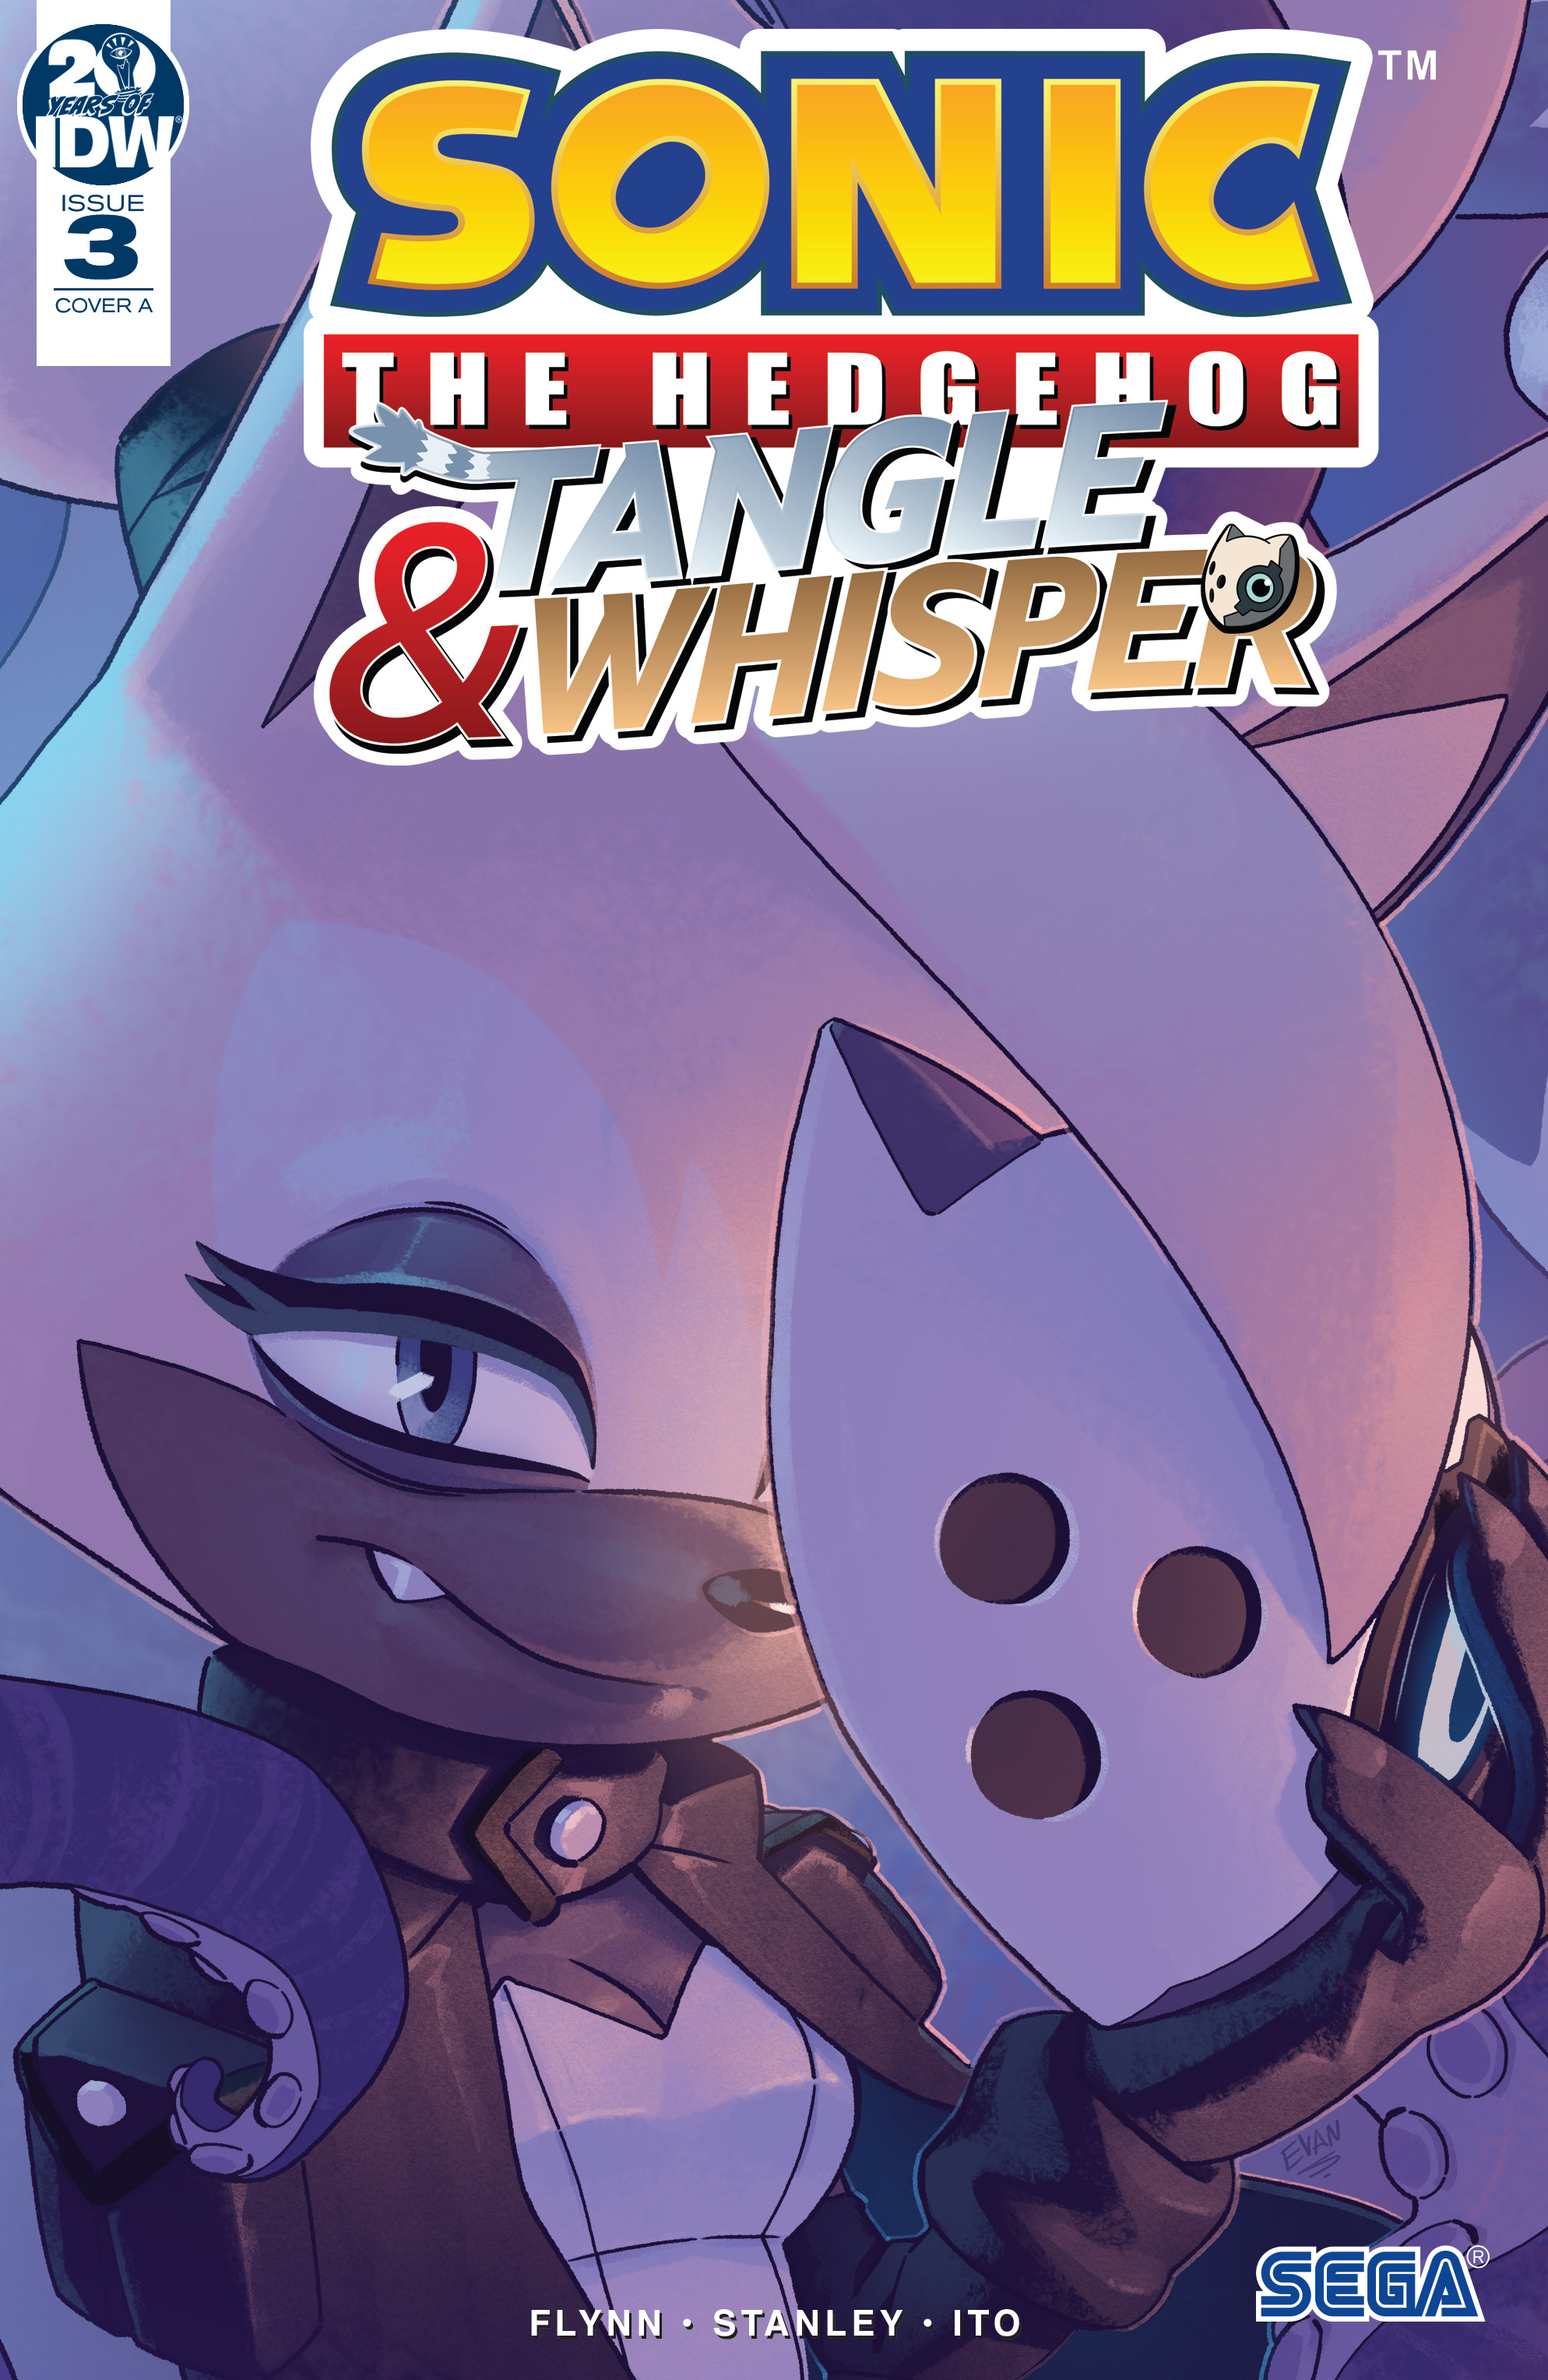 Read online Sonic the Hedgehog: Tangle & Whisper comic -  Issue #3 - 1